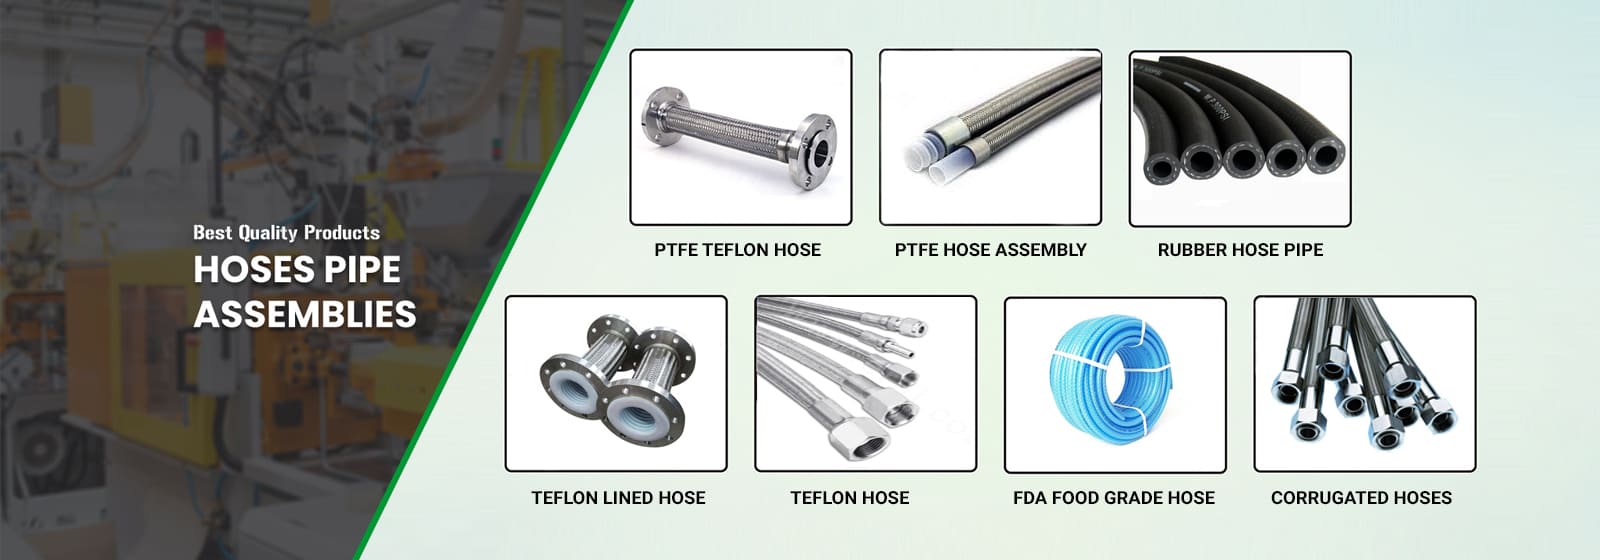 Stainless Steel Hose, SS Wire Braided Hose, Flexible Hoses, Mumbai, India